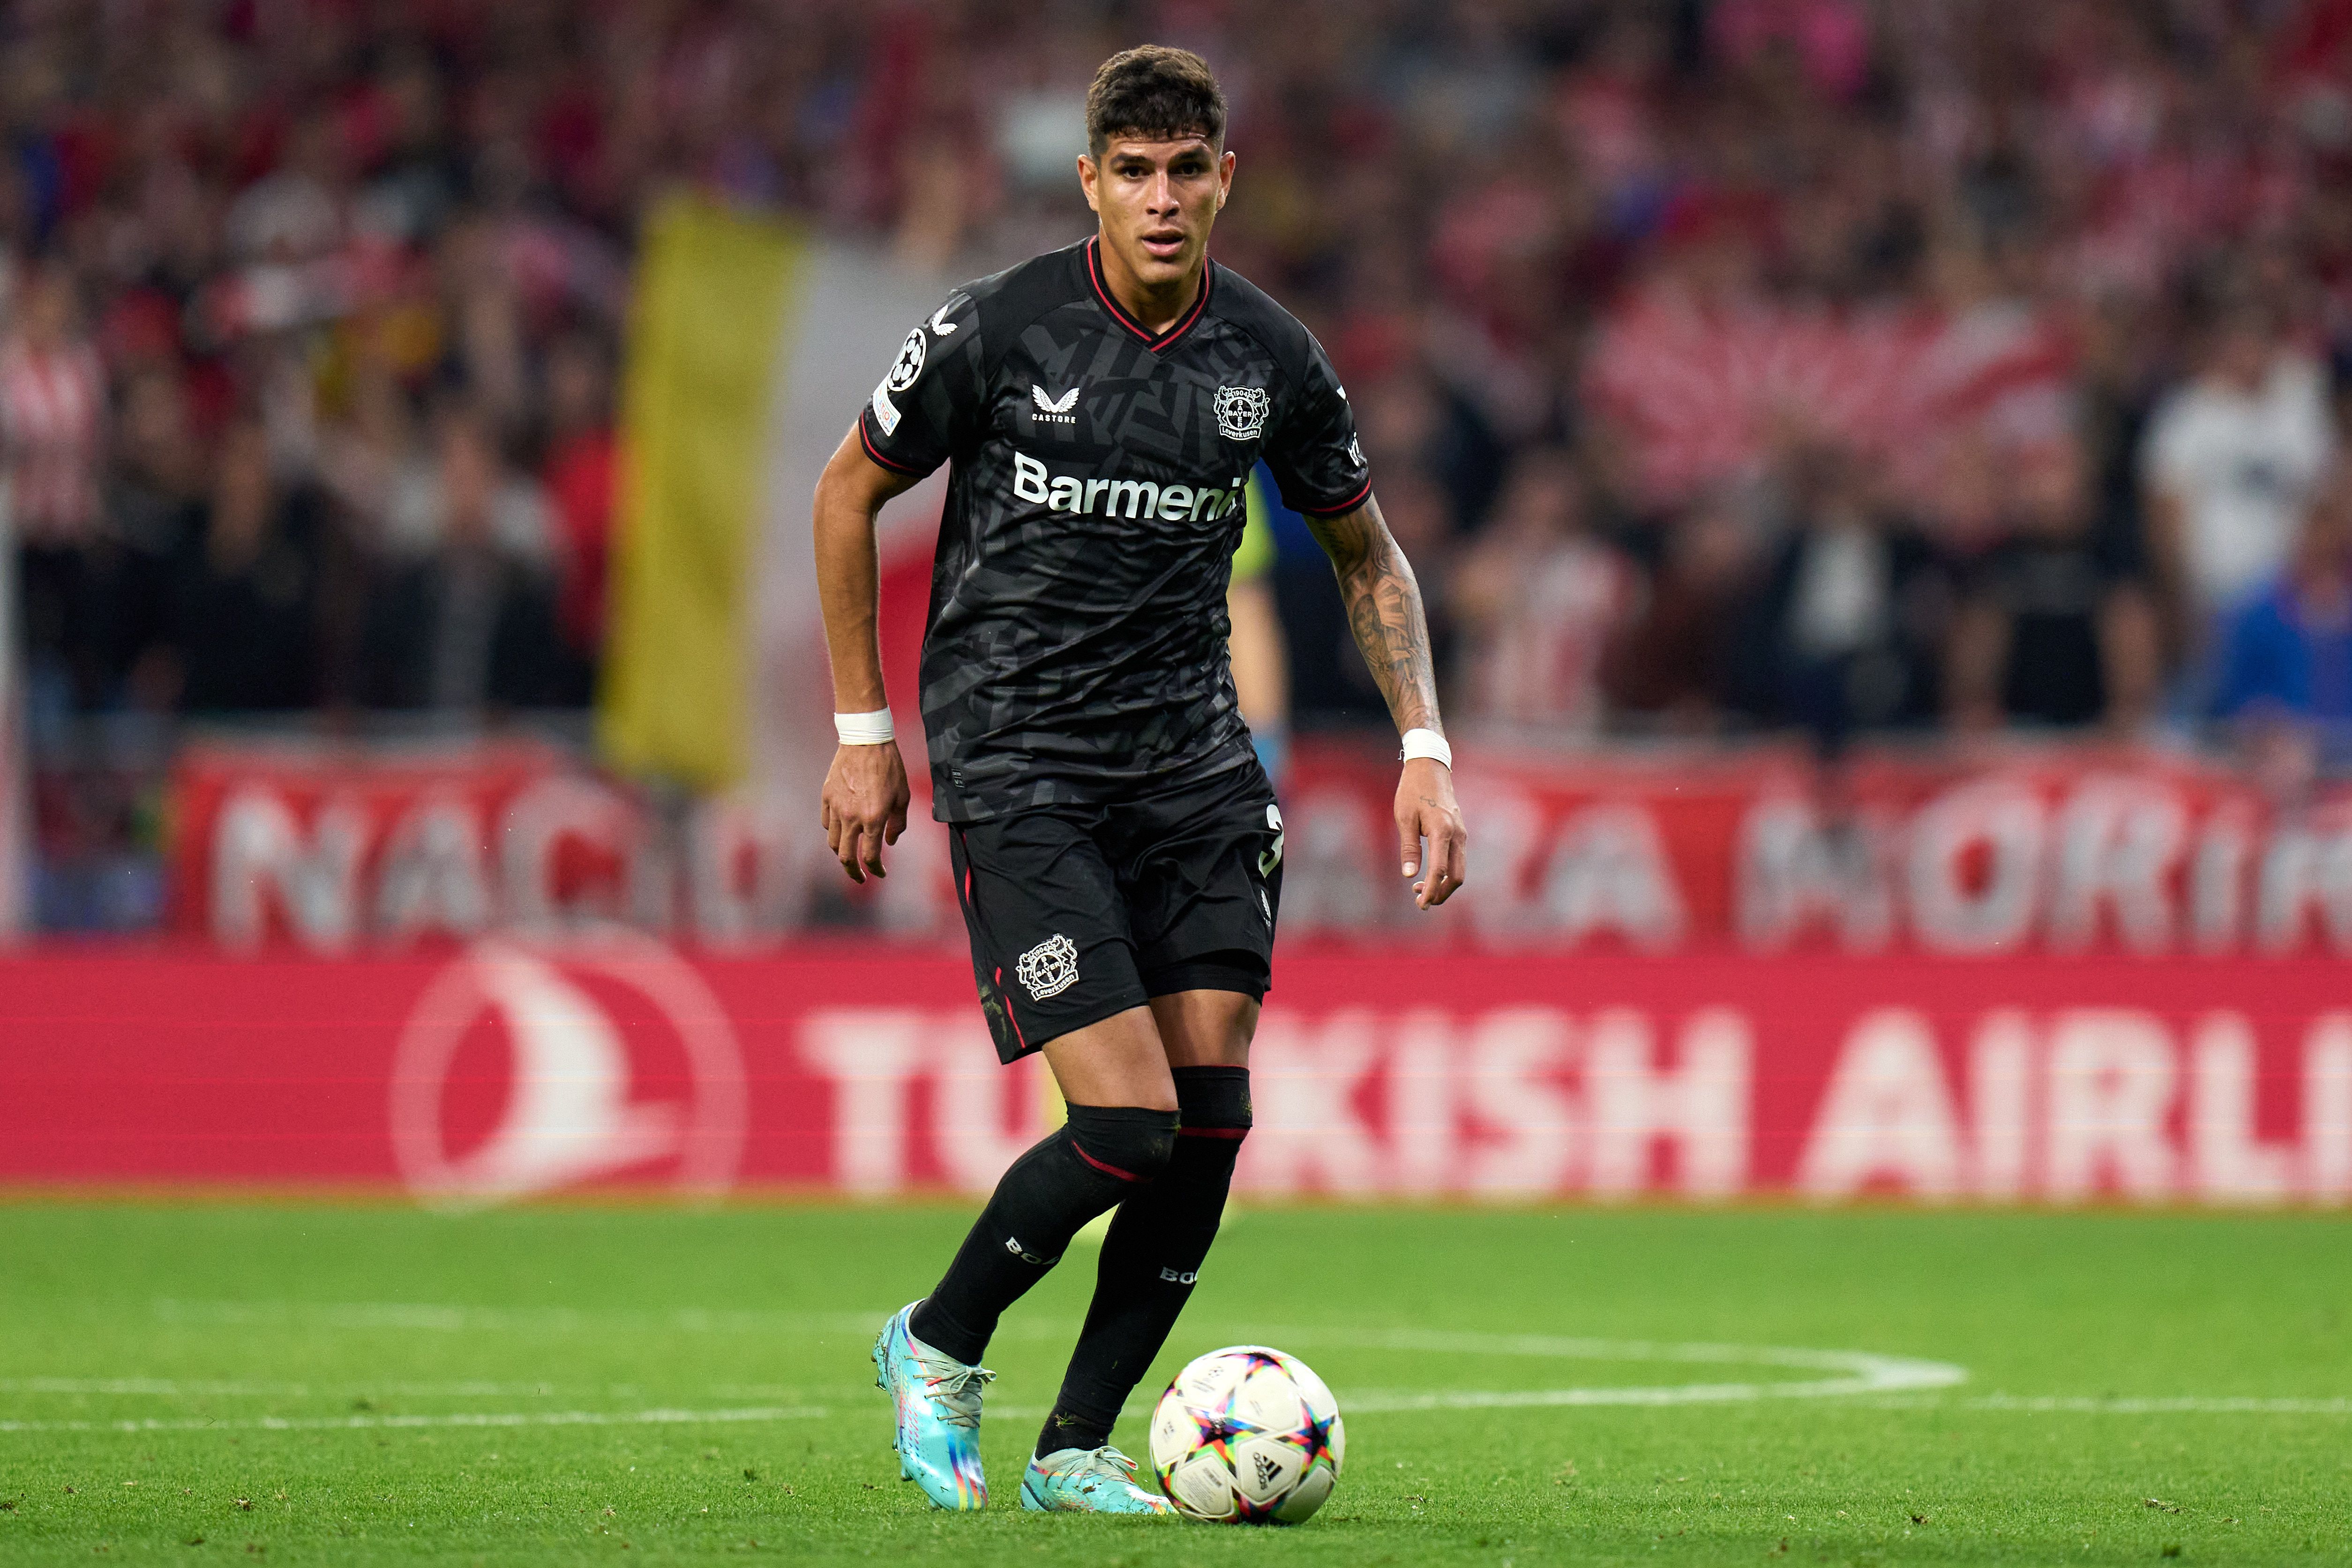 Piero Hincapie of Bayer 04 Leverkusen in action during the UEFA Champions League group B match